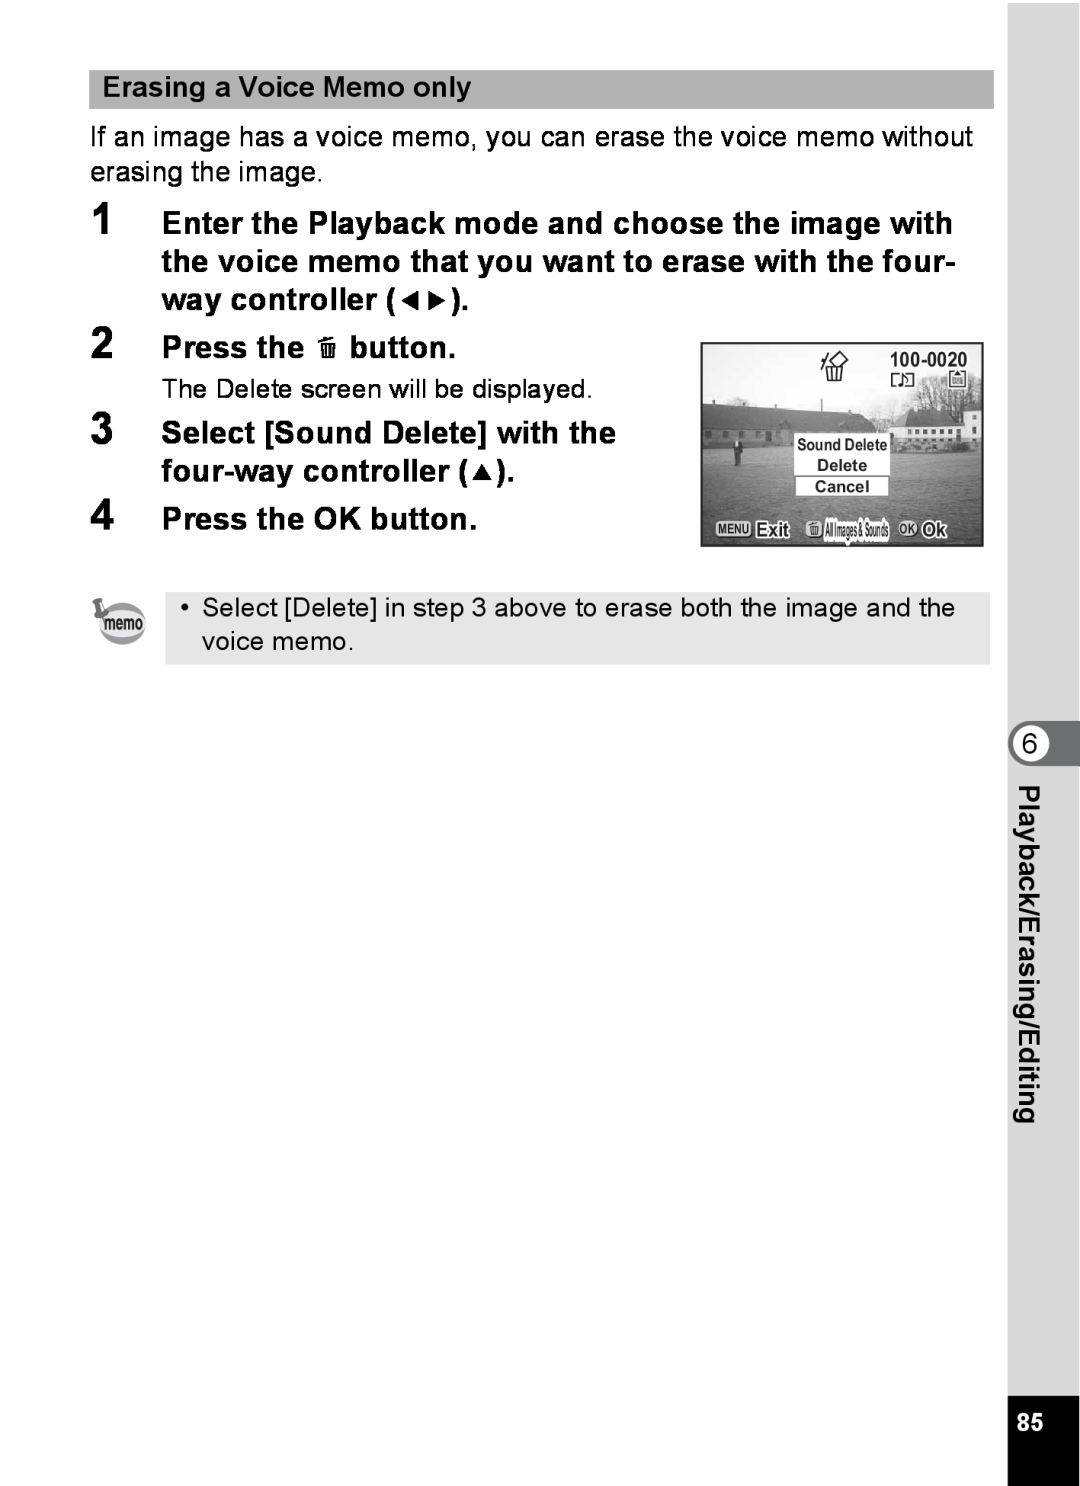 Pentax S4 manual Select Sound Delete with the four-way controller Press the OK button, Erasing a Voice Memo only 